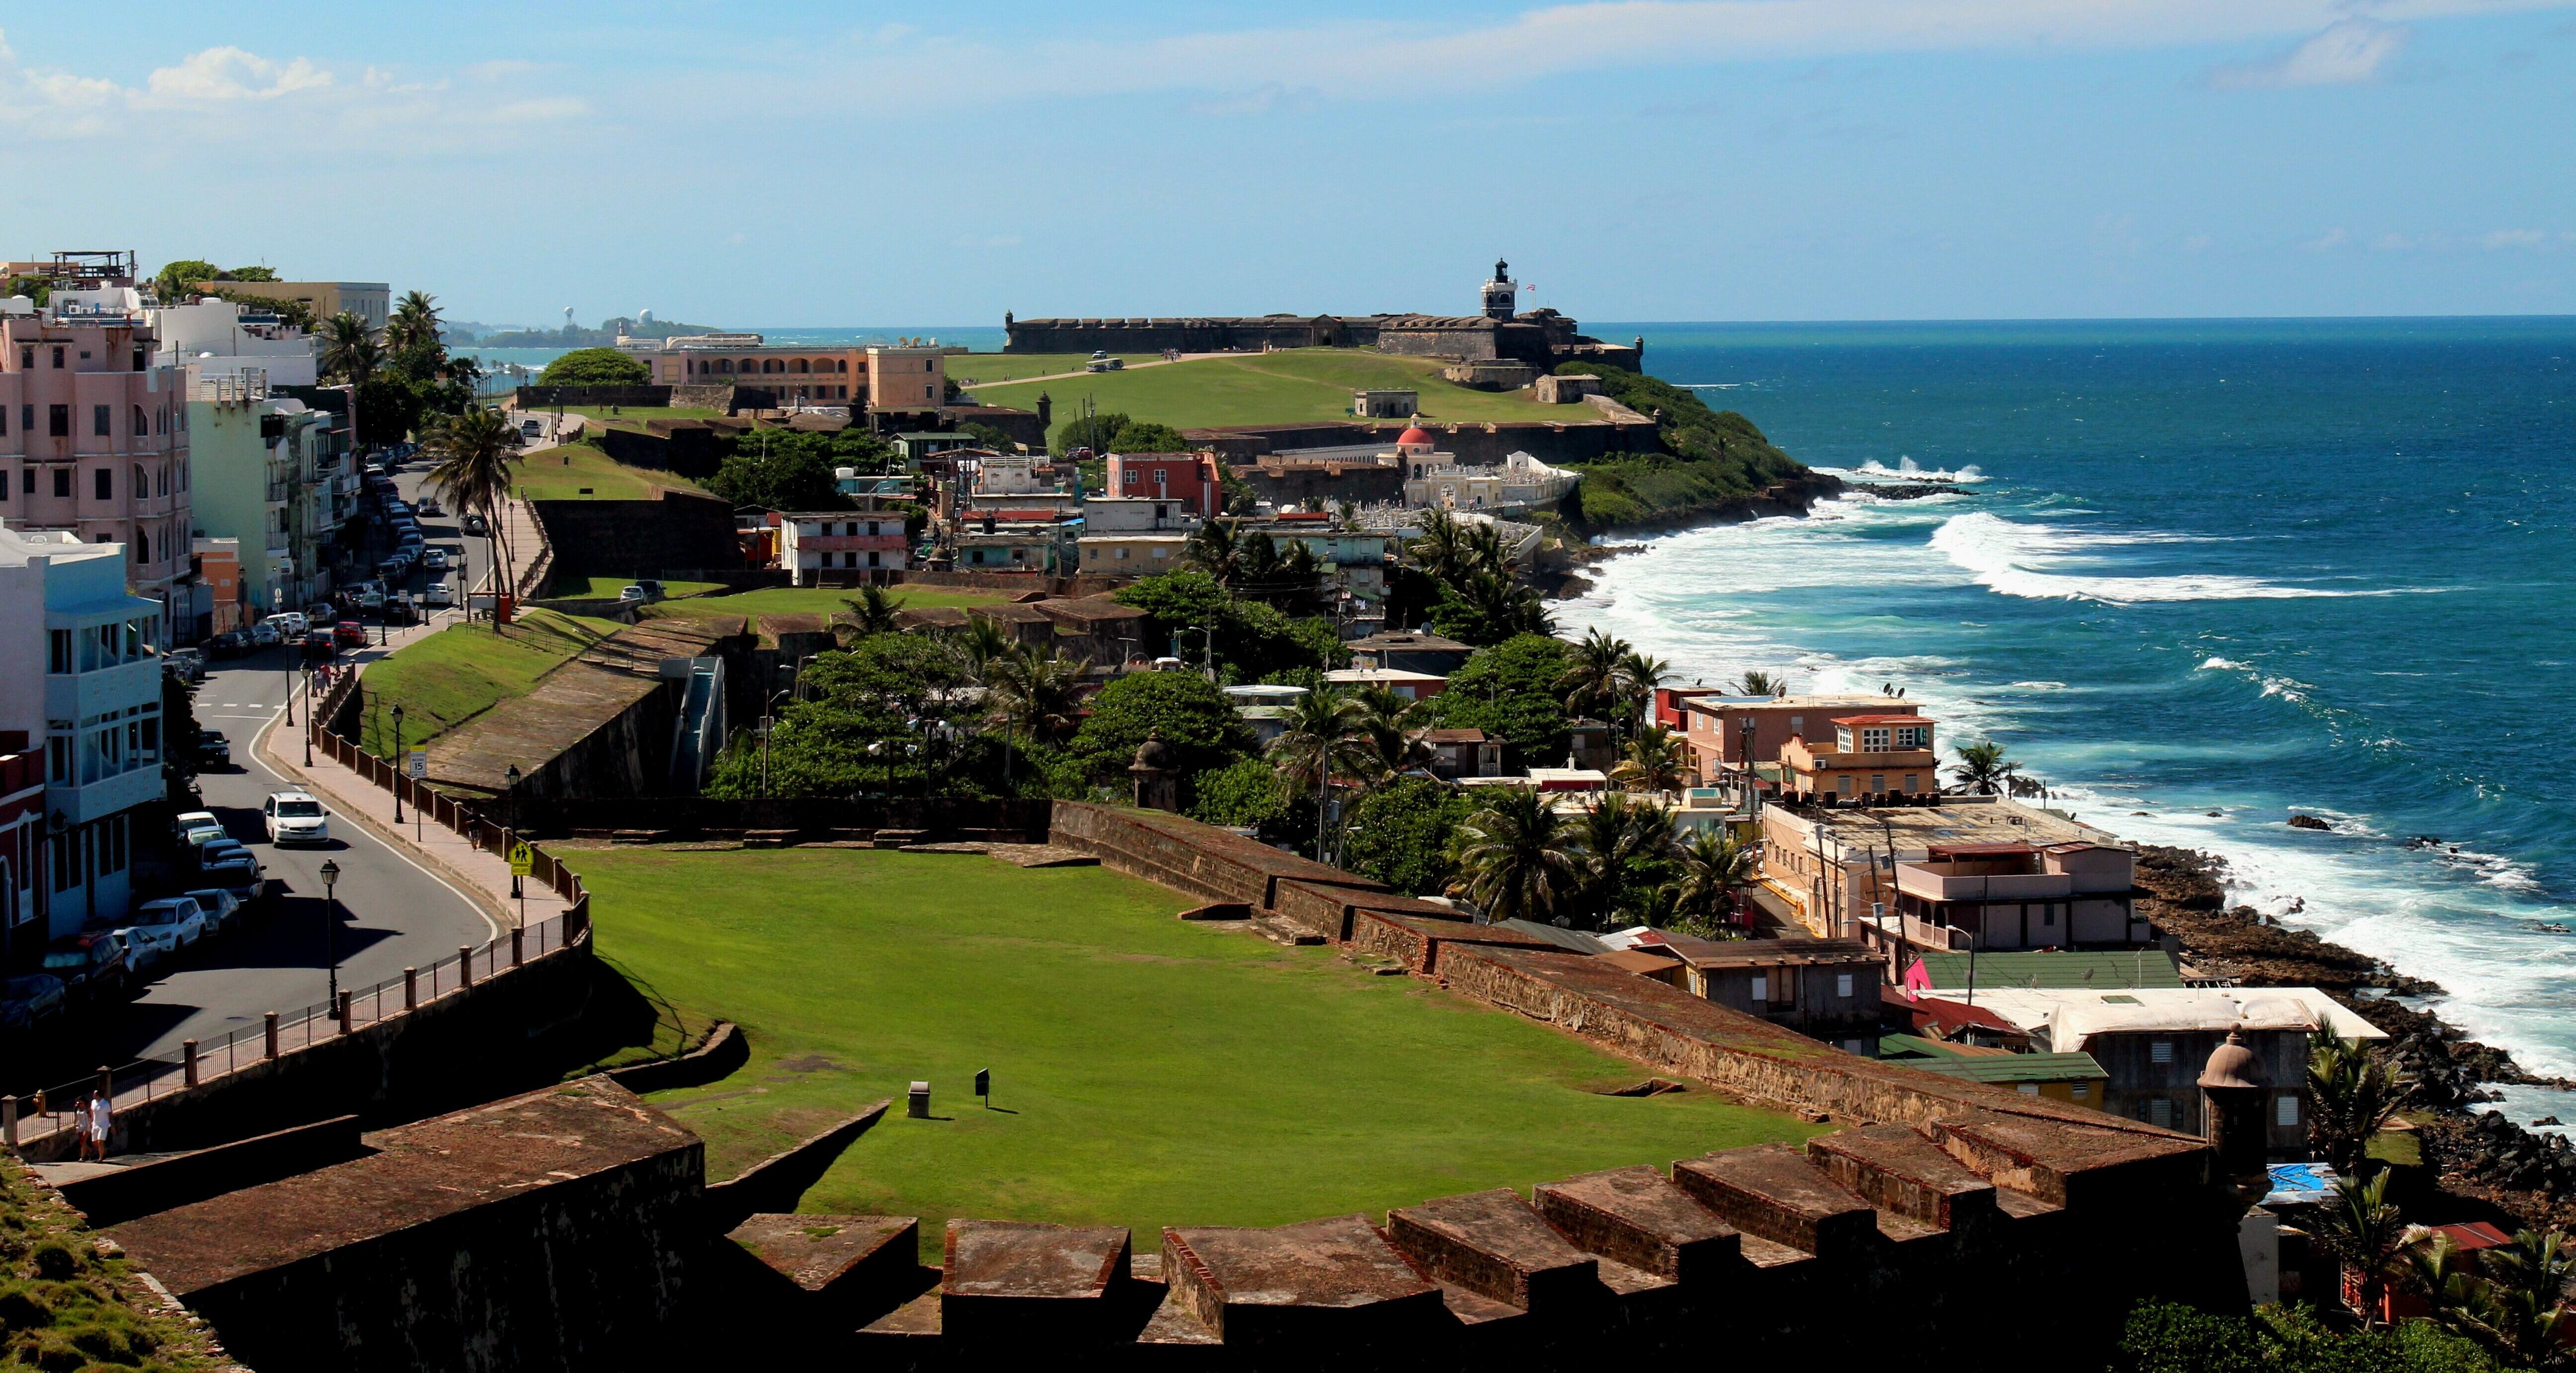 20 Interesting Facts About Puerto Rico